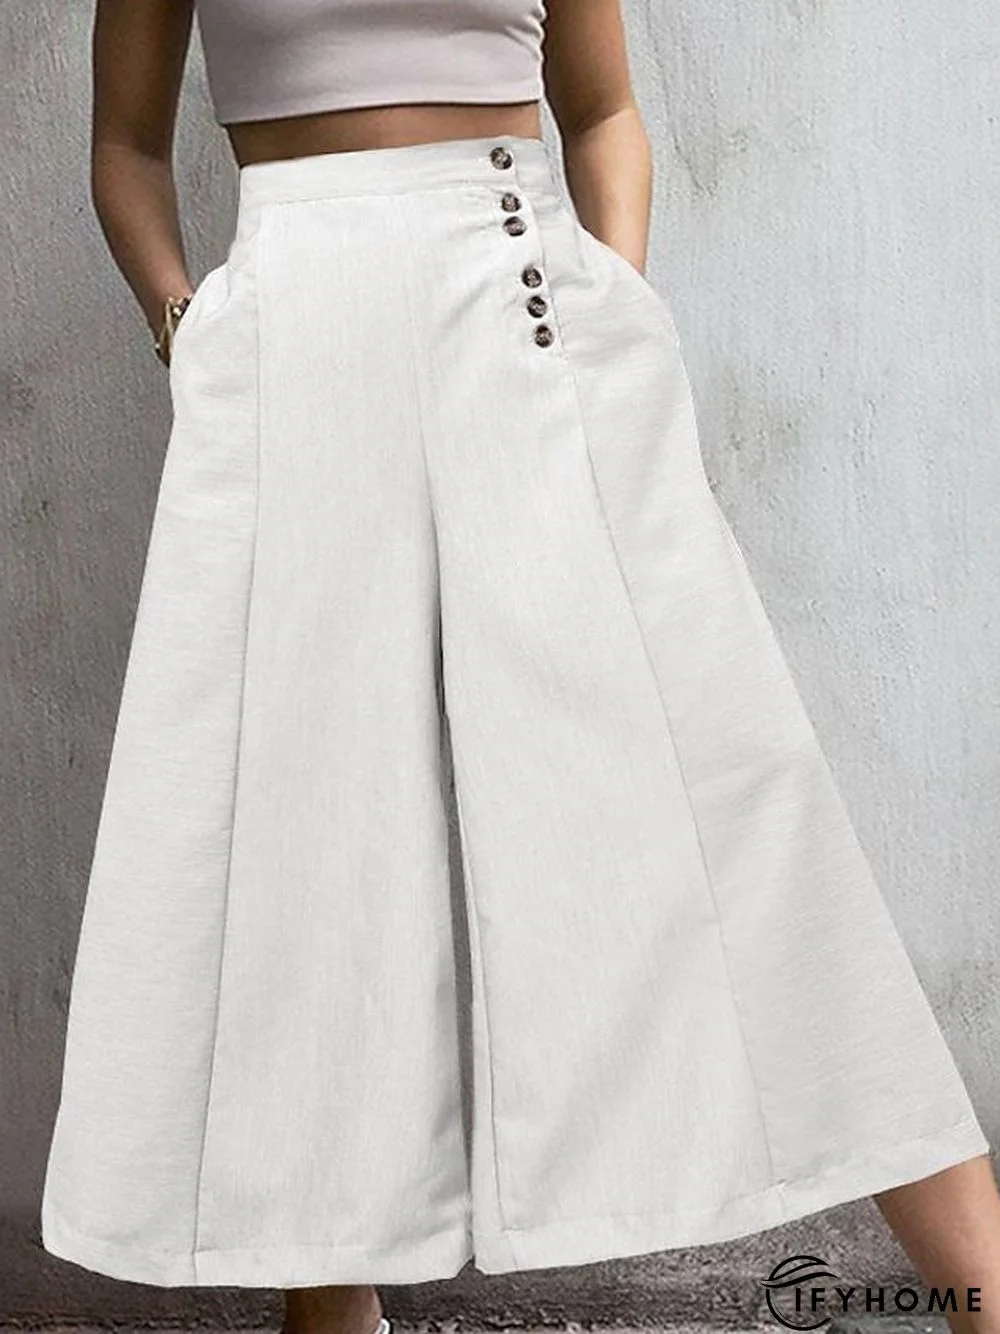 Women's Wide Leg Palazzo Pants Faux Linen Stripe White Blue Casual Casual Daily Wear Pocket Ankle-Length Breathability Solid Colored S M L XL 2XL | IFYHOME